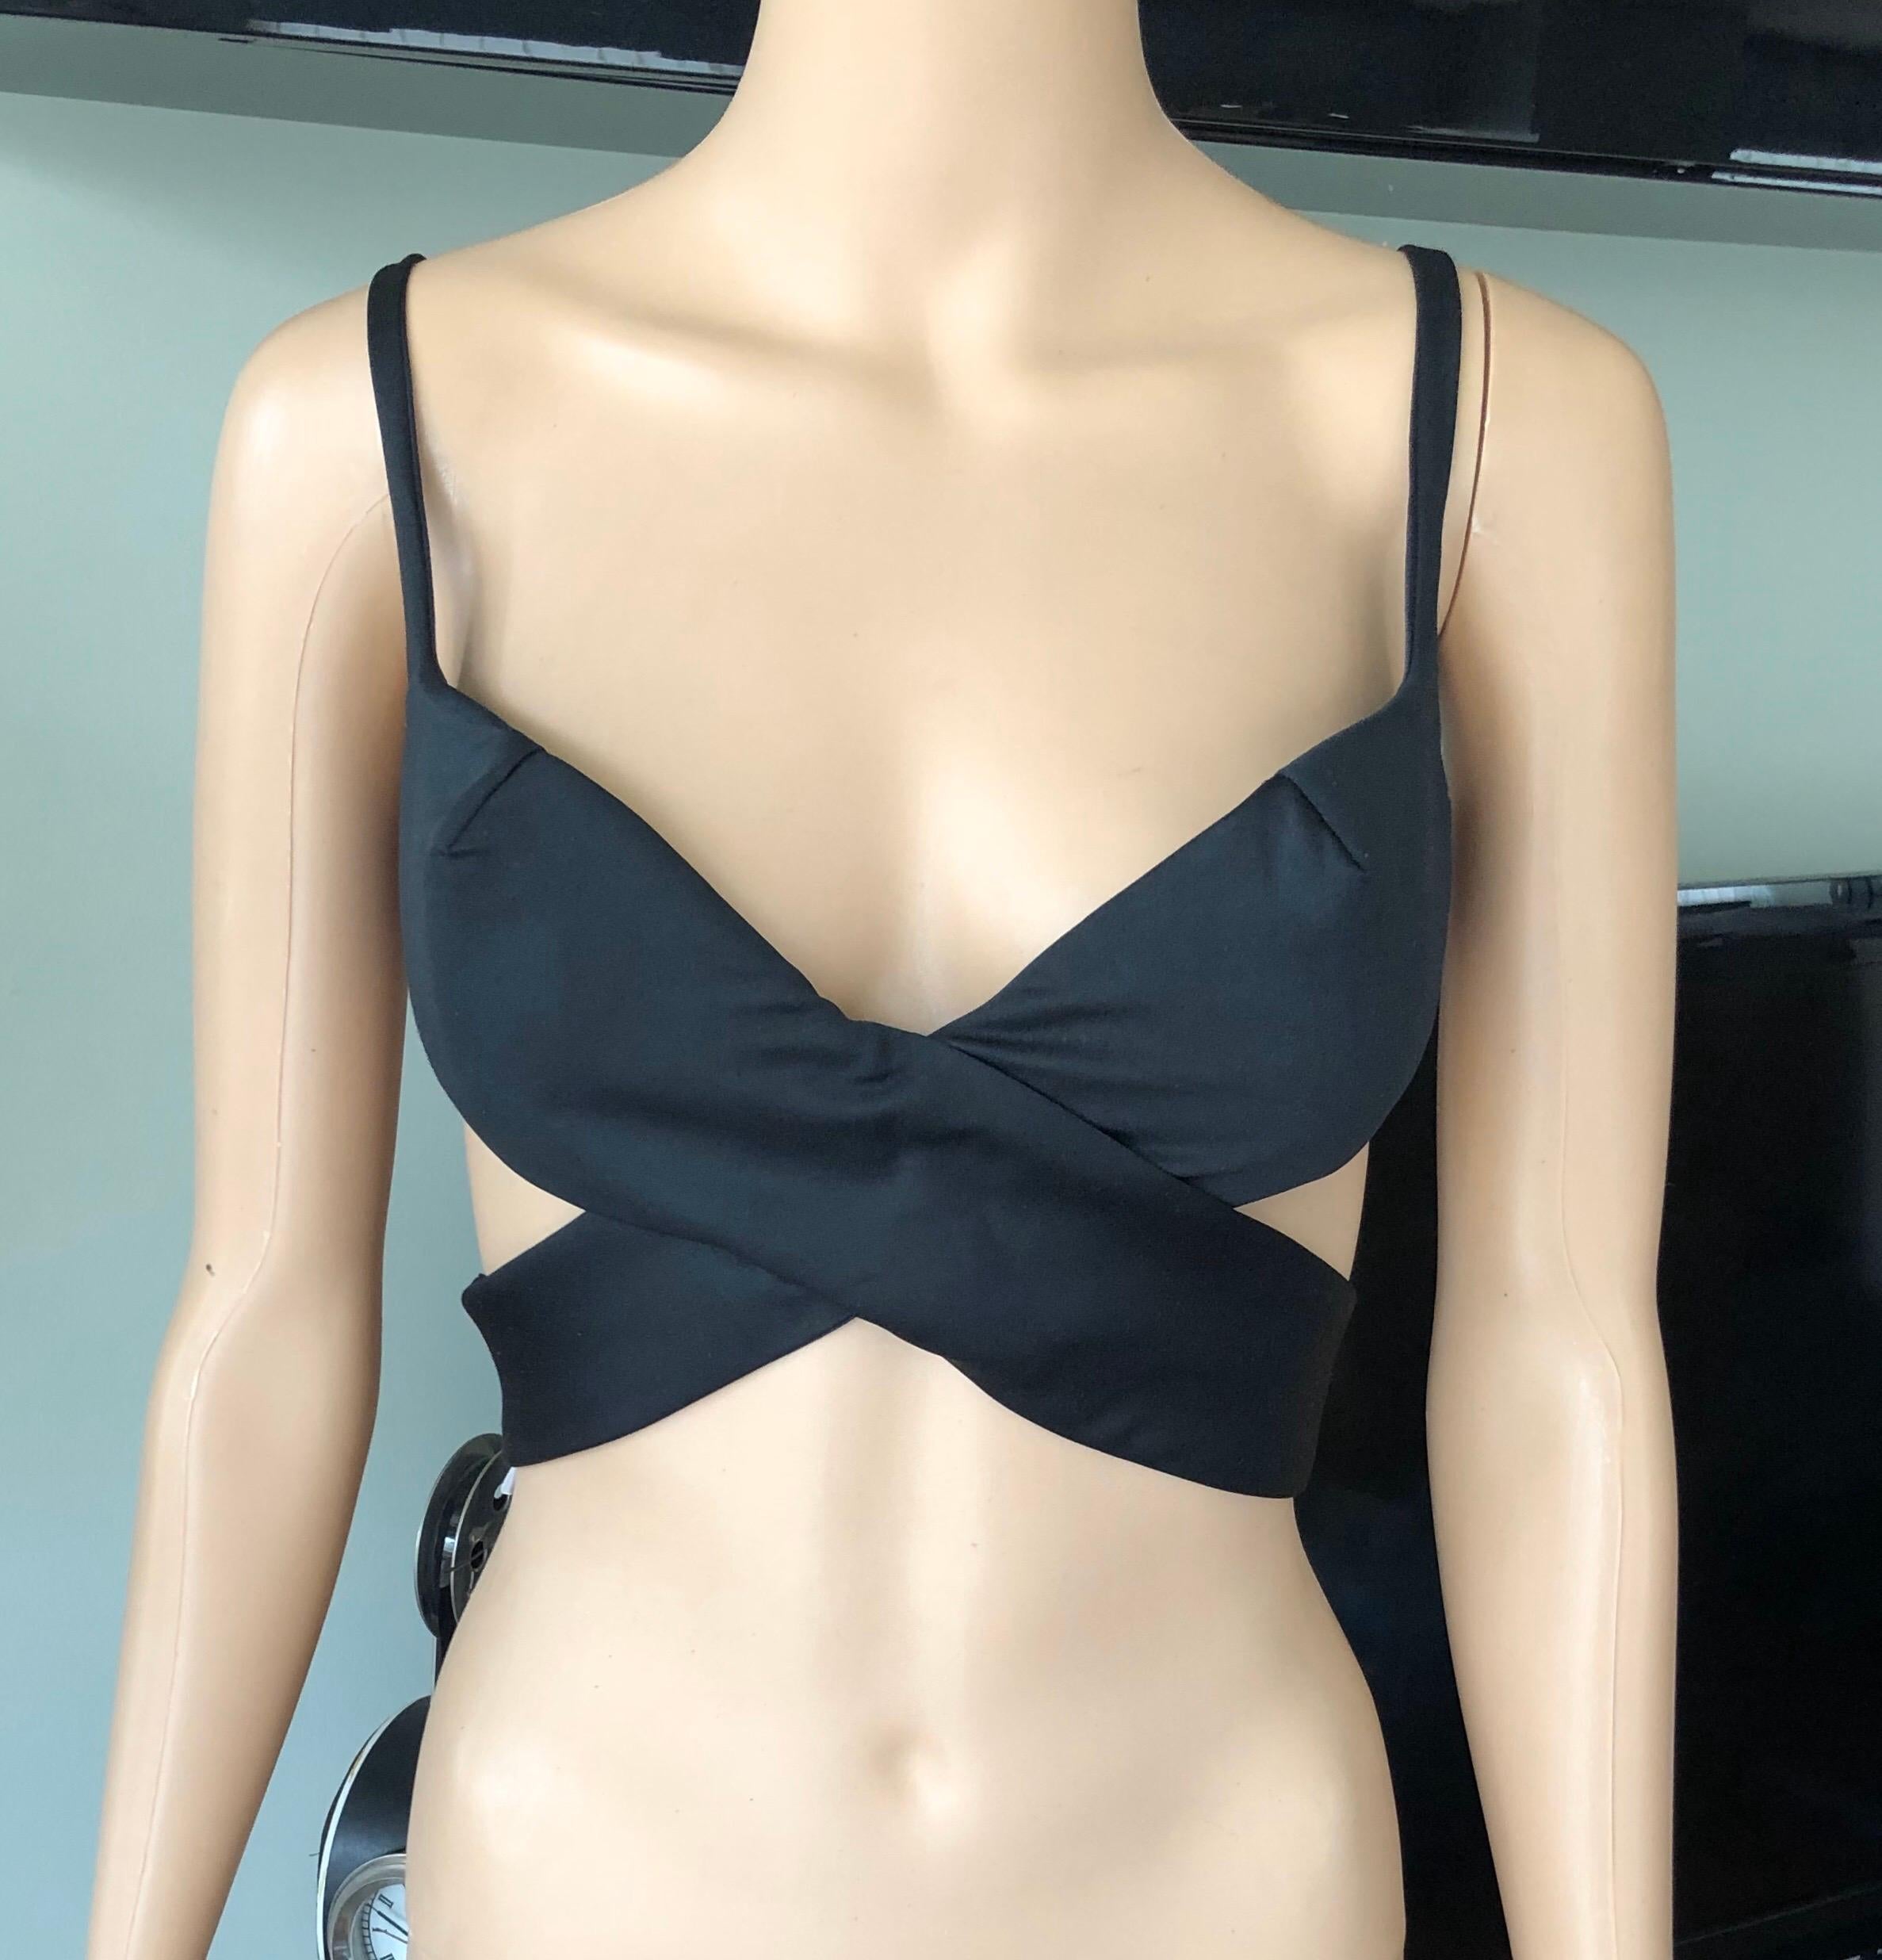 Tom Ford for Gucci S/S 2001 Runway Cutout Black Bustier Crop Top IT 40

Gucci by Tom Ford silk cutout bustier crop top featuring hook & eye closure at back.